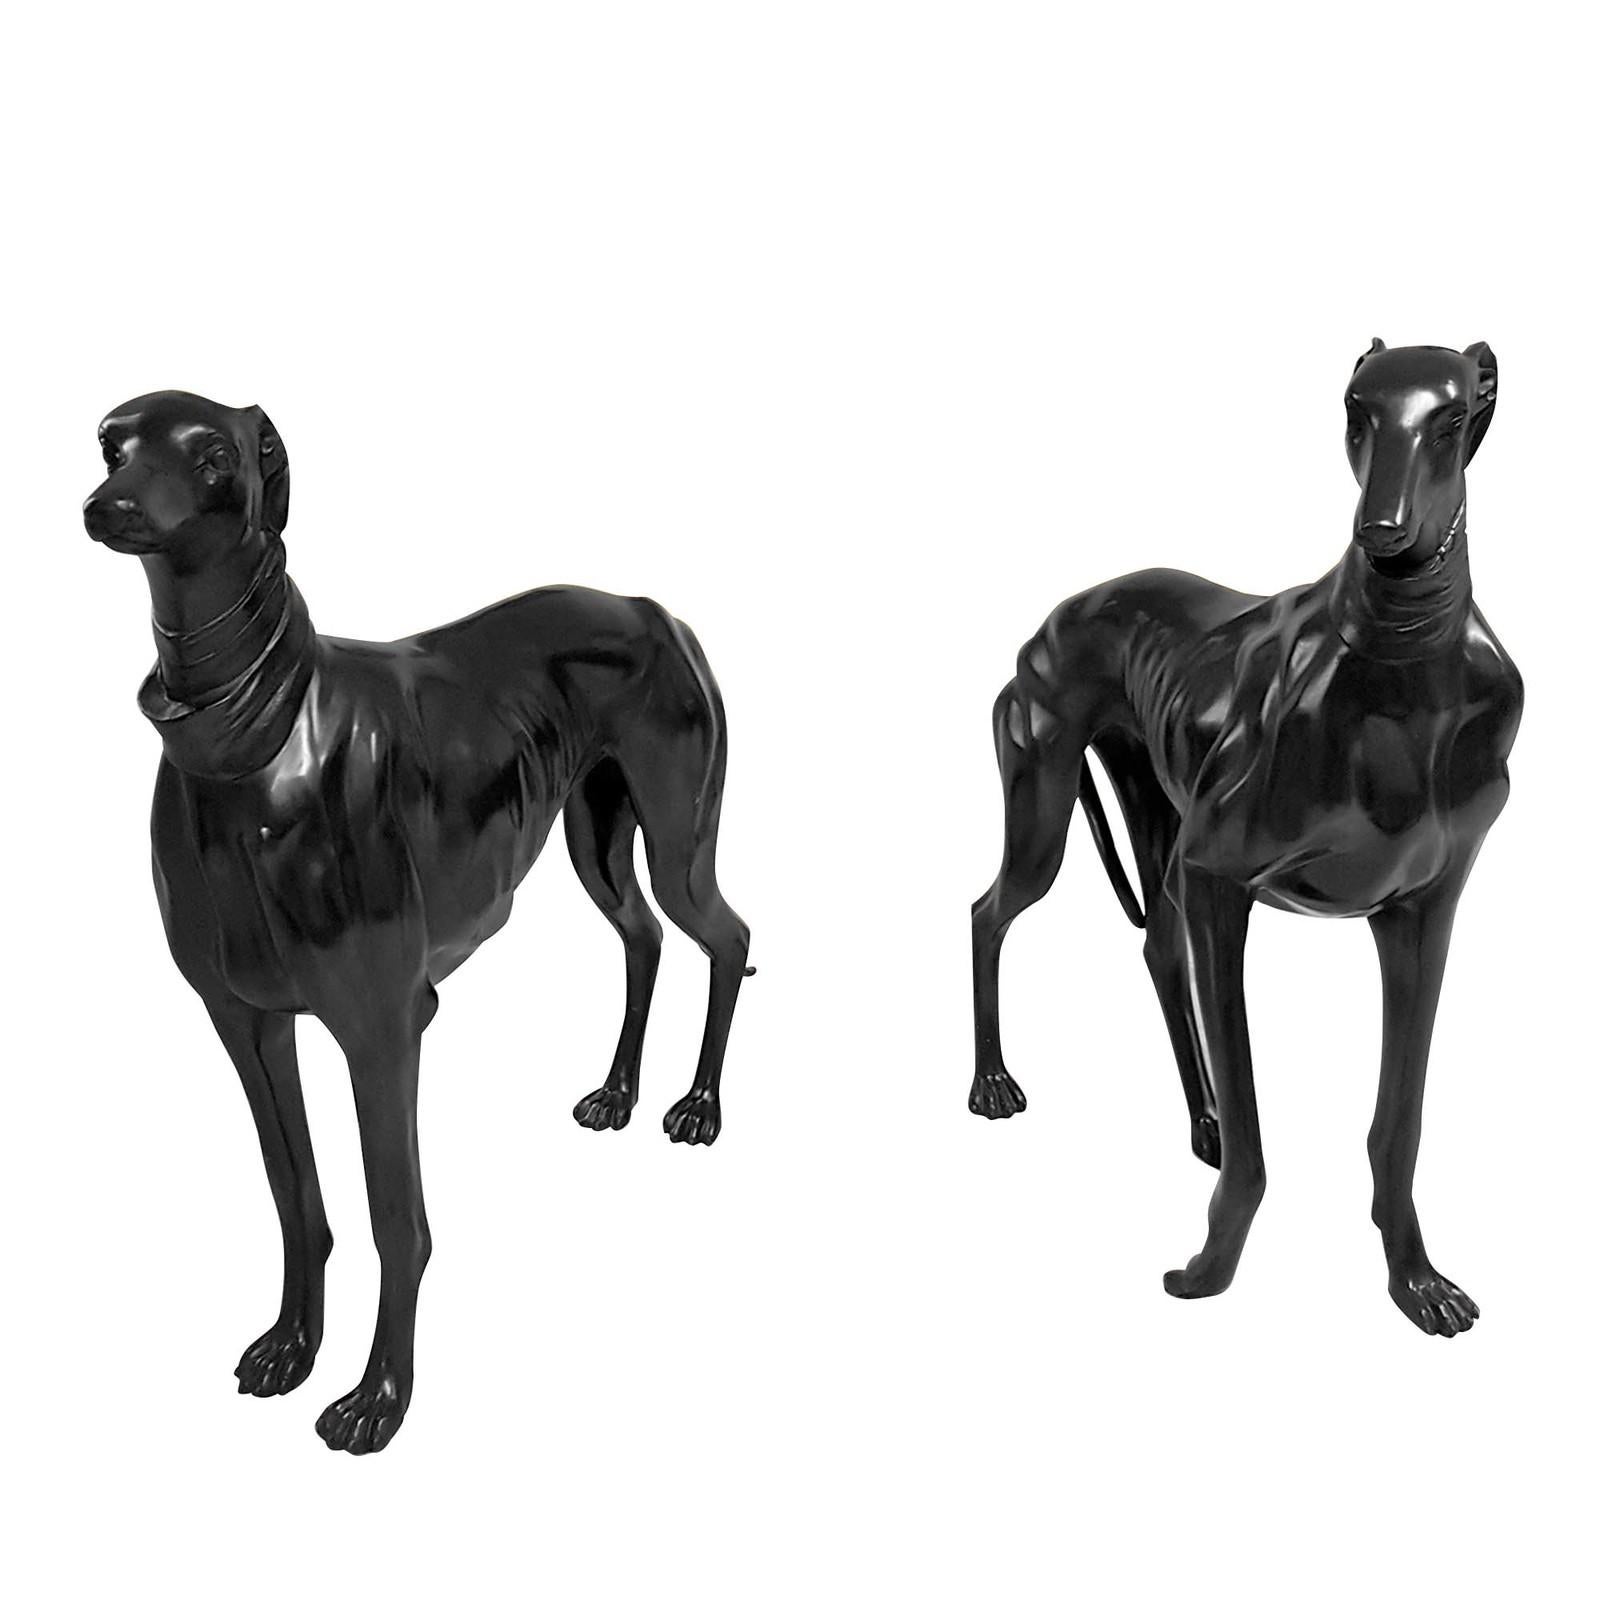 The greyhounds duo are a pair of dynamic sculptures in lost-wax bronze fusion with a patina 500' finish. With a profoundly life-like presence the two dogs are the perfect complement for a unique and fauna inspired style of decor anywhere in your